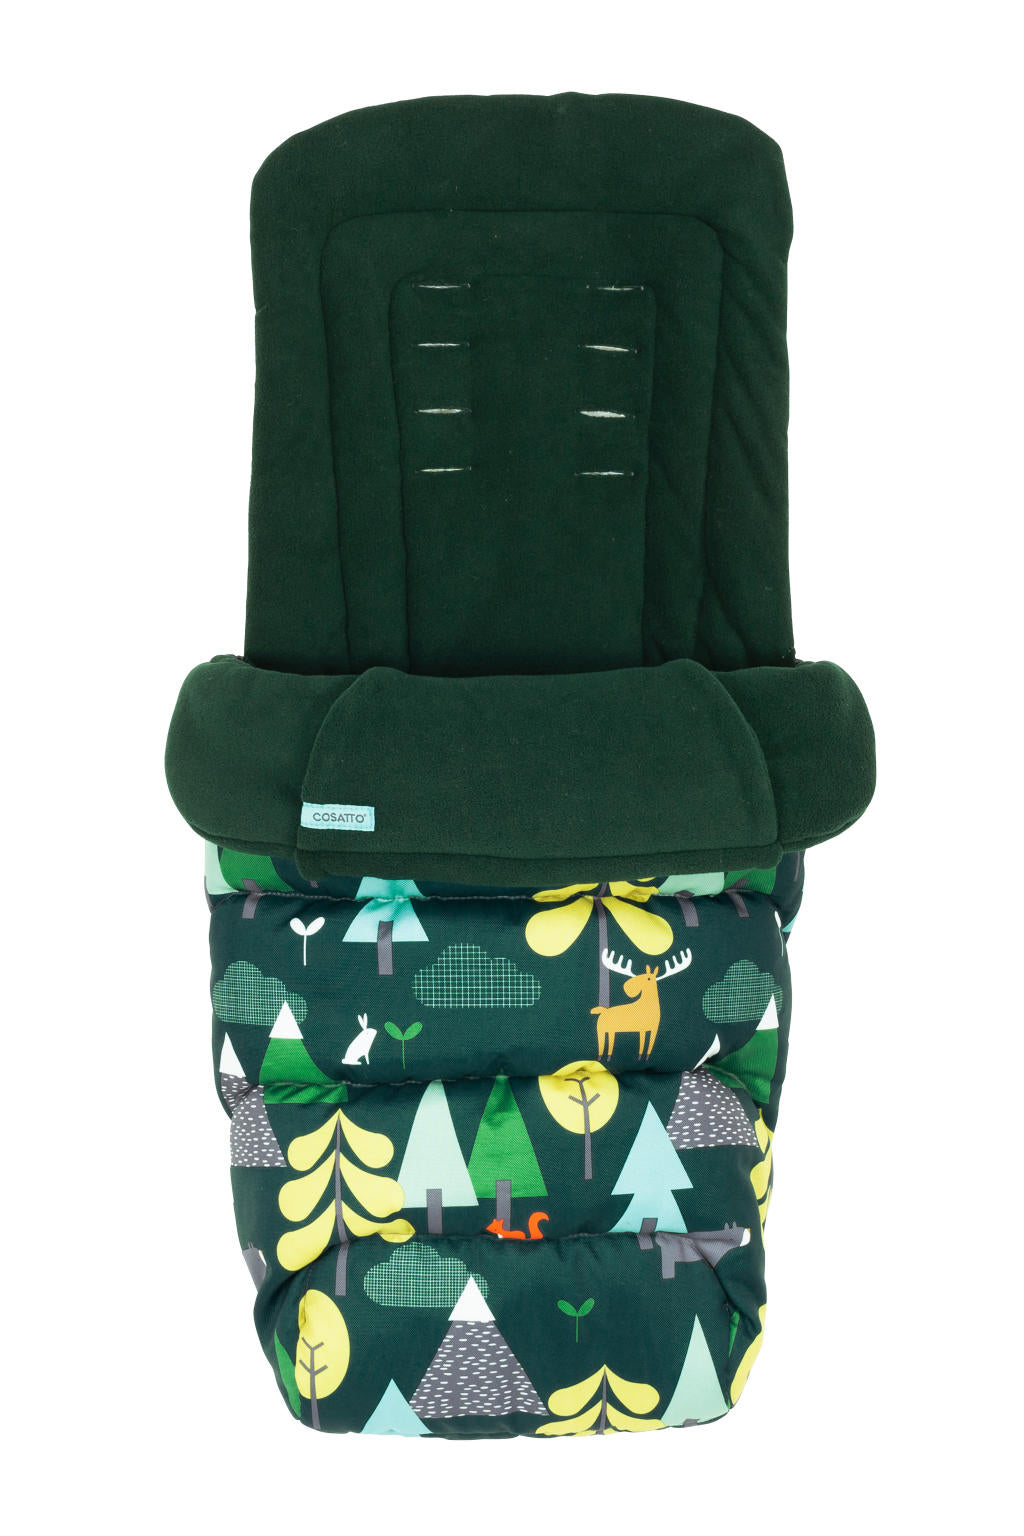 Giggle 3 with Footmuff Bundle Into The Wild